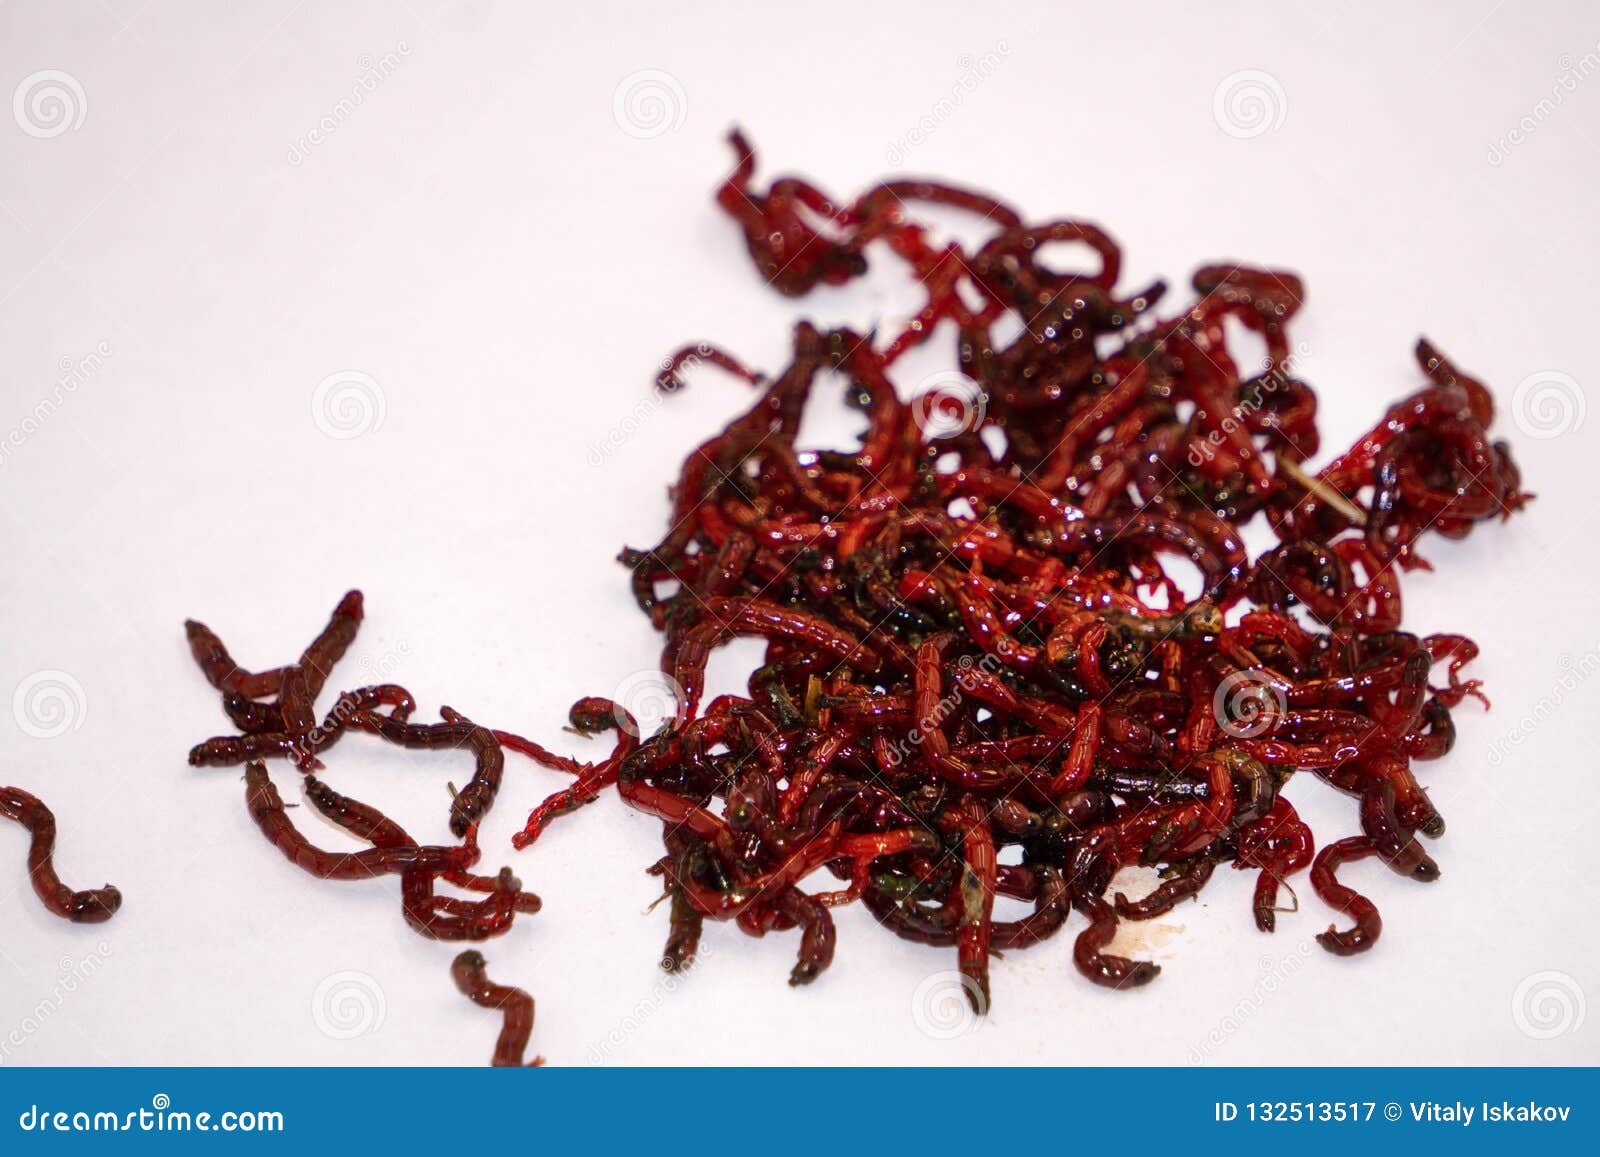 Bloodworms Midge Larvae is Common Life Food for Aquarium Fish and Live-bait  for Fishing Stock Image - Image of close, carrier: 132513517